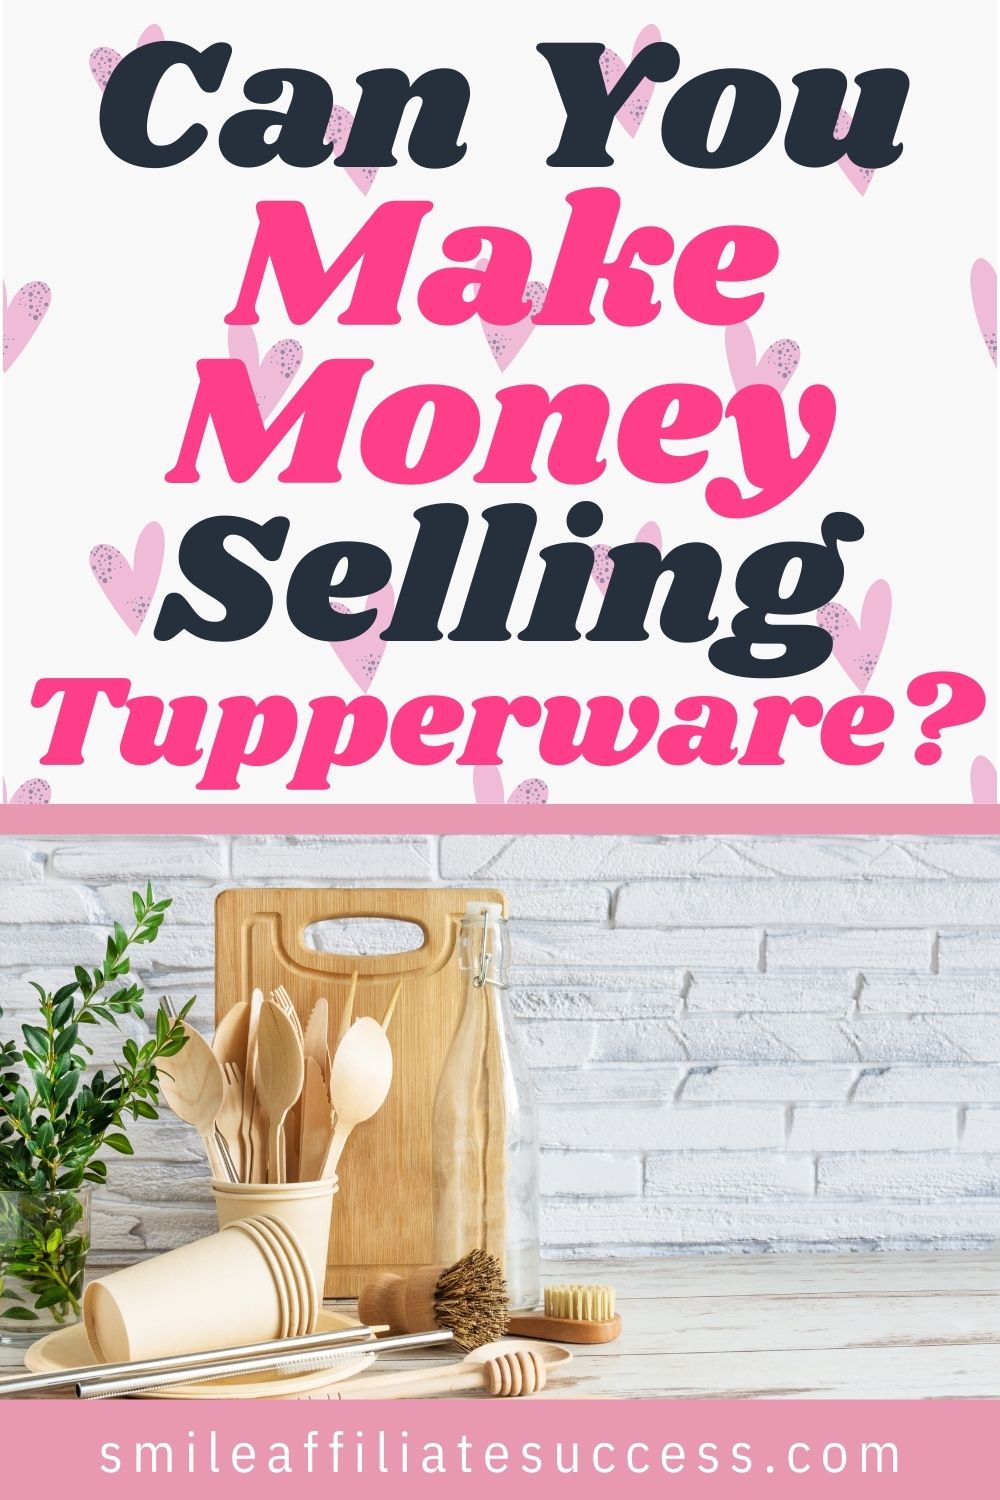 Can You Make Money Selling Tupperware?